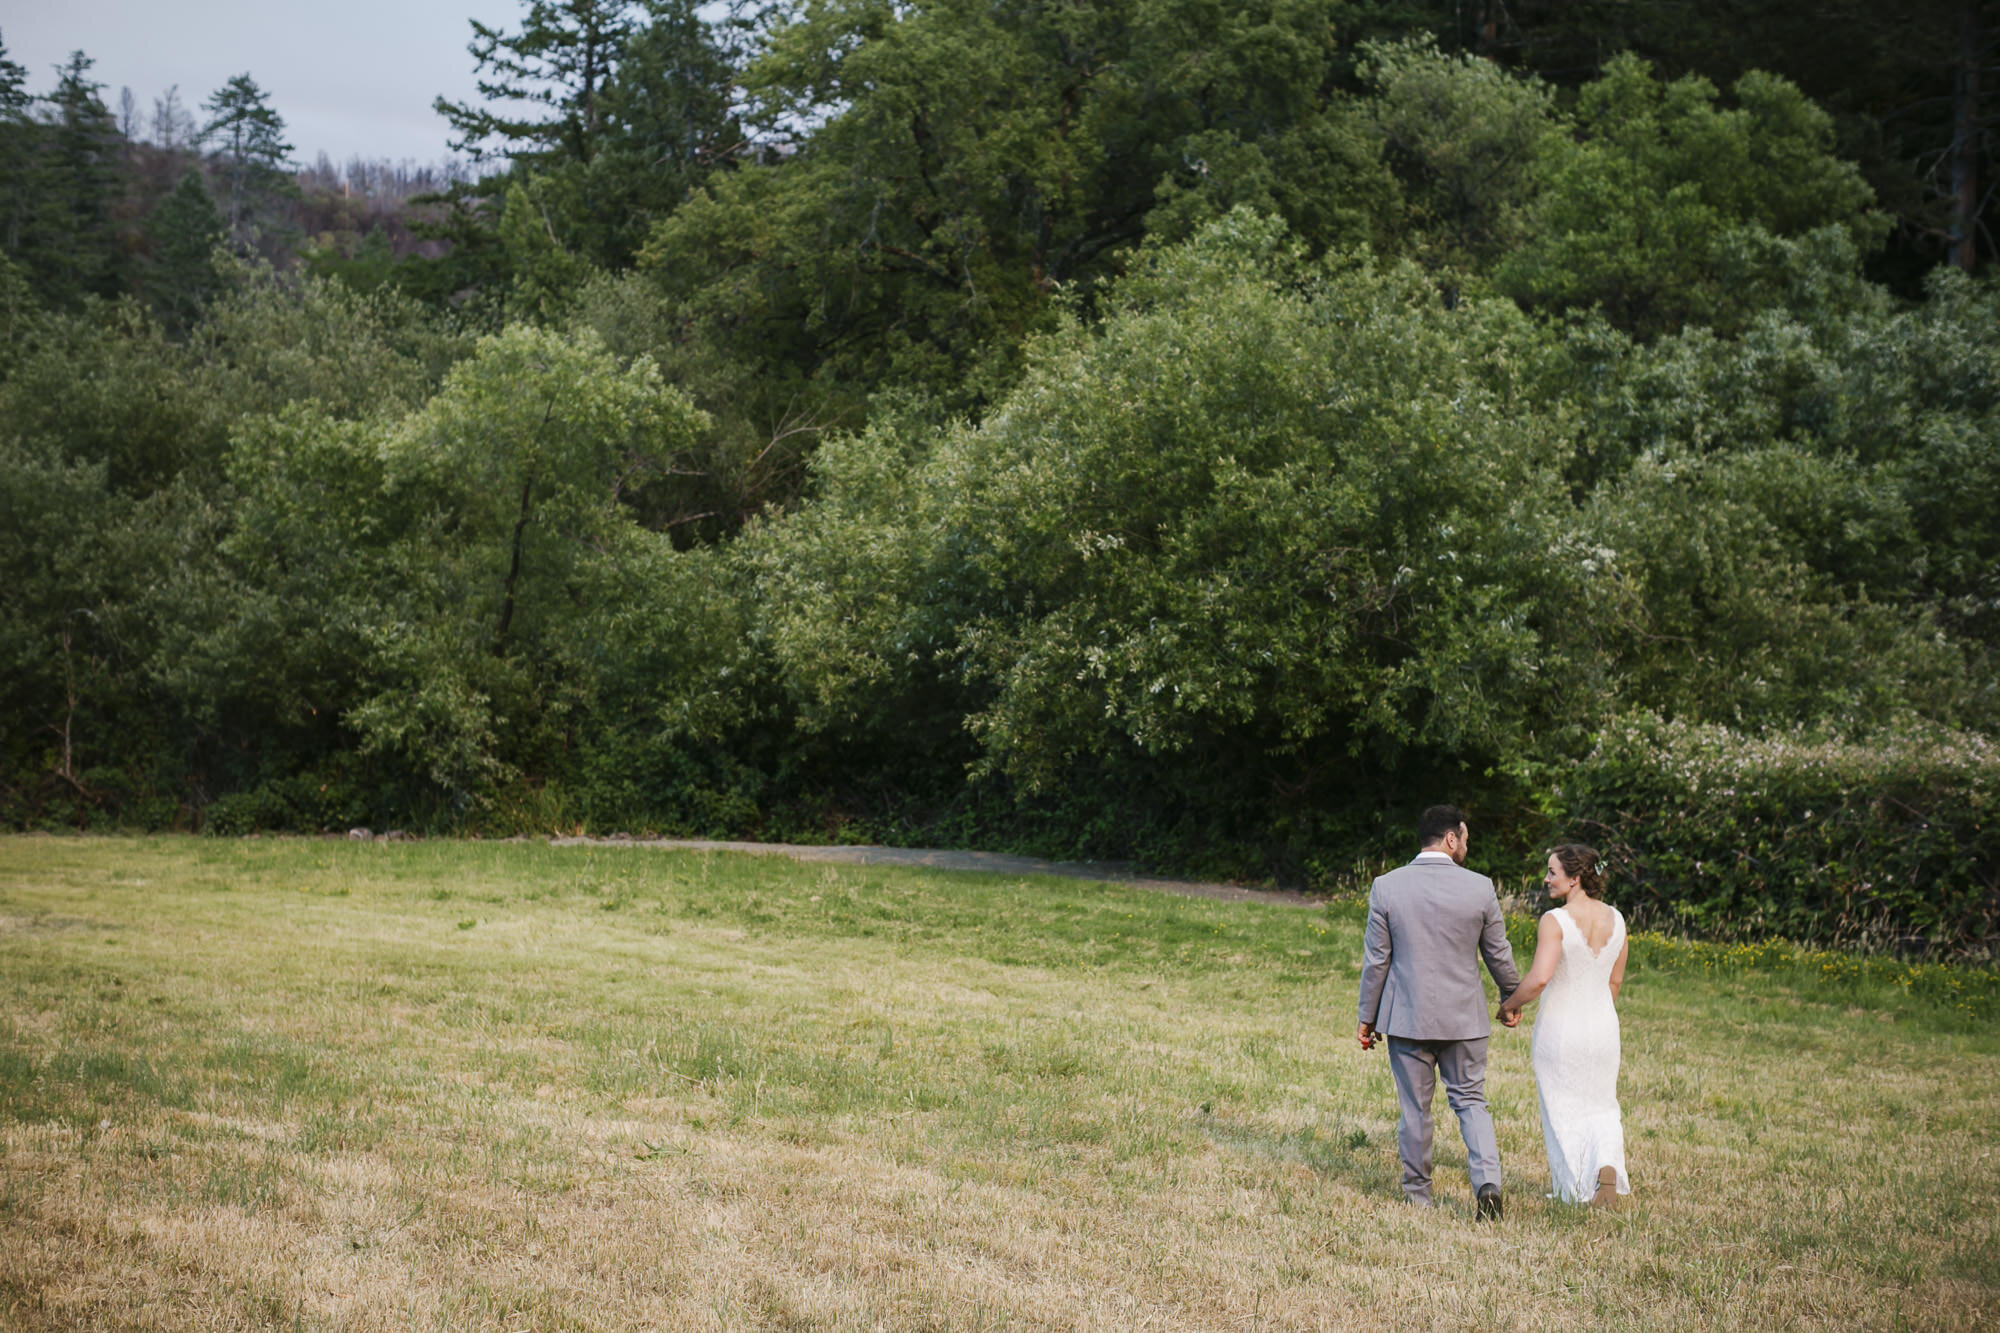 Wedding couple walk together after their backyard ceremony in Sonoma